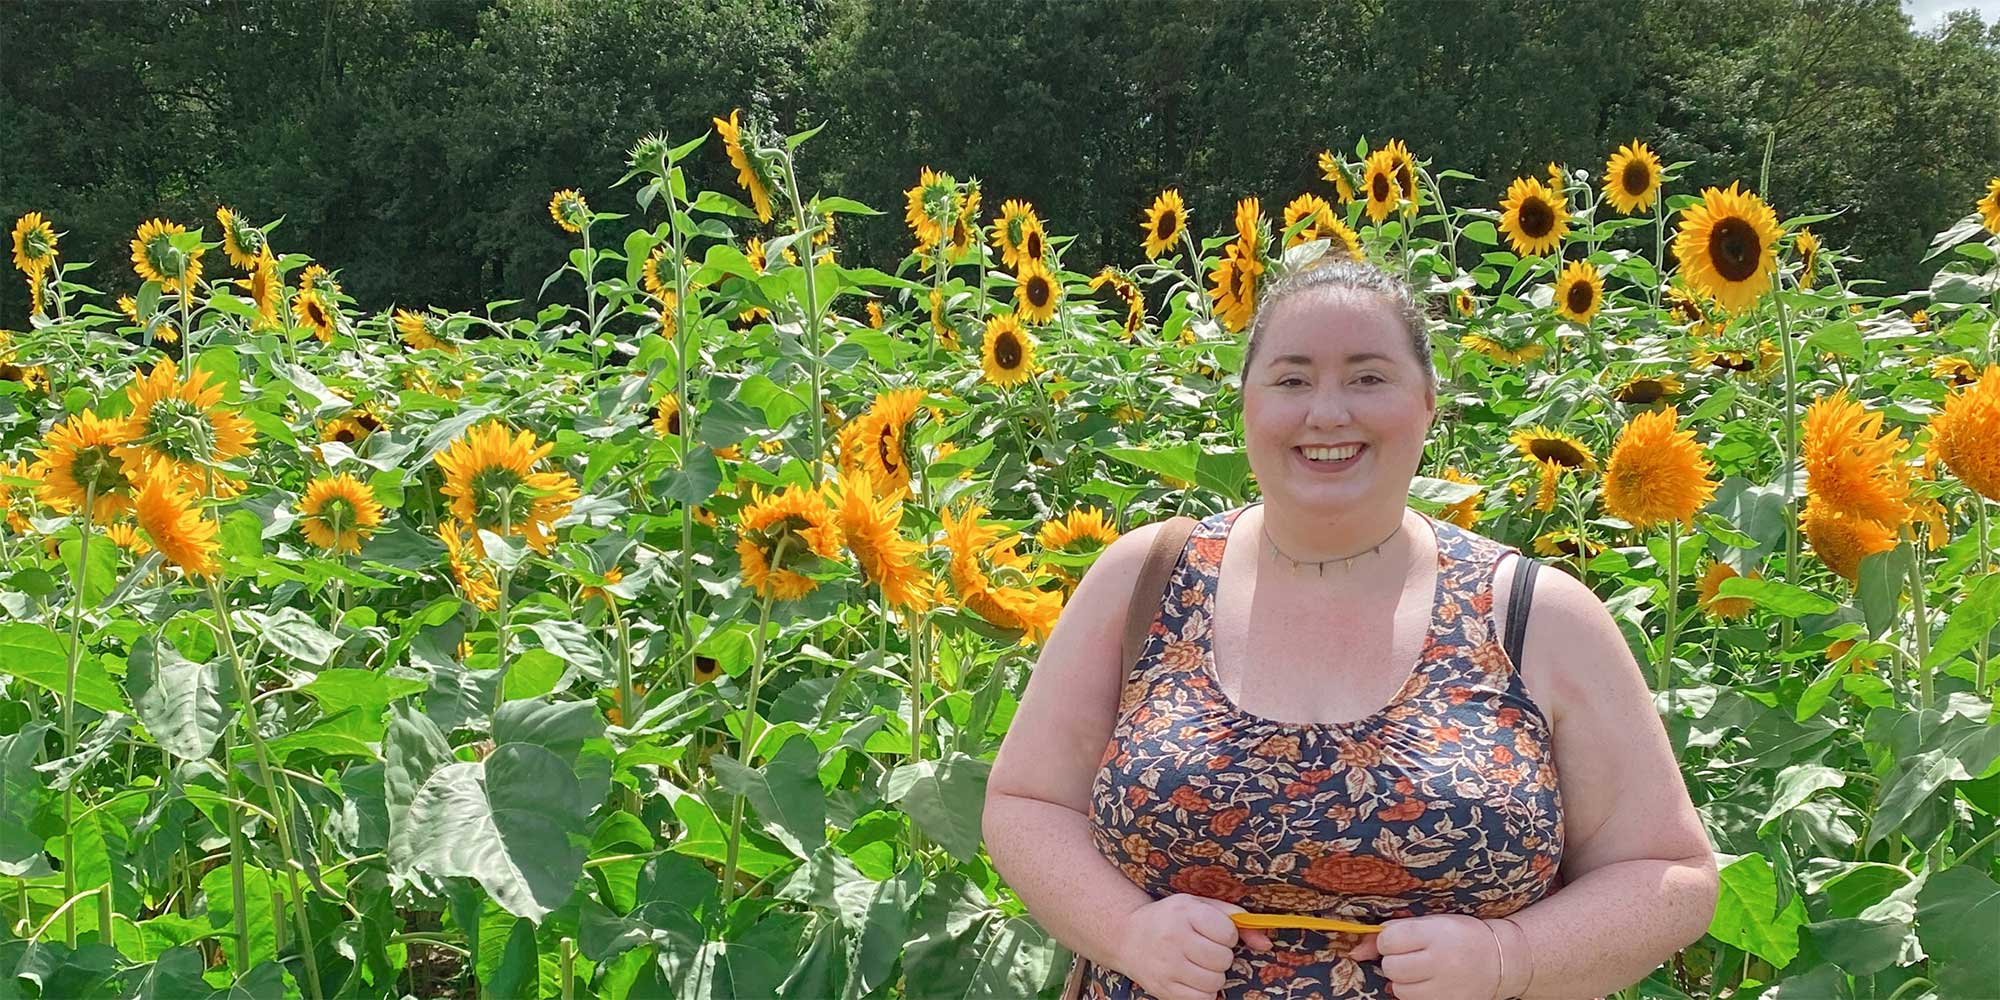 Lexie Manion stands smiling in a field of sunflowers